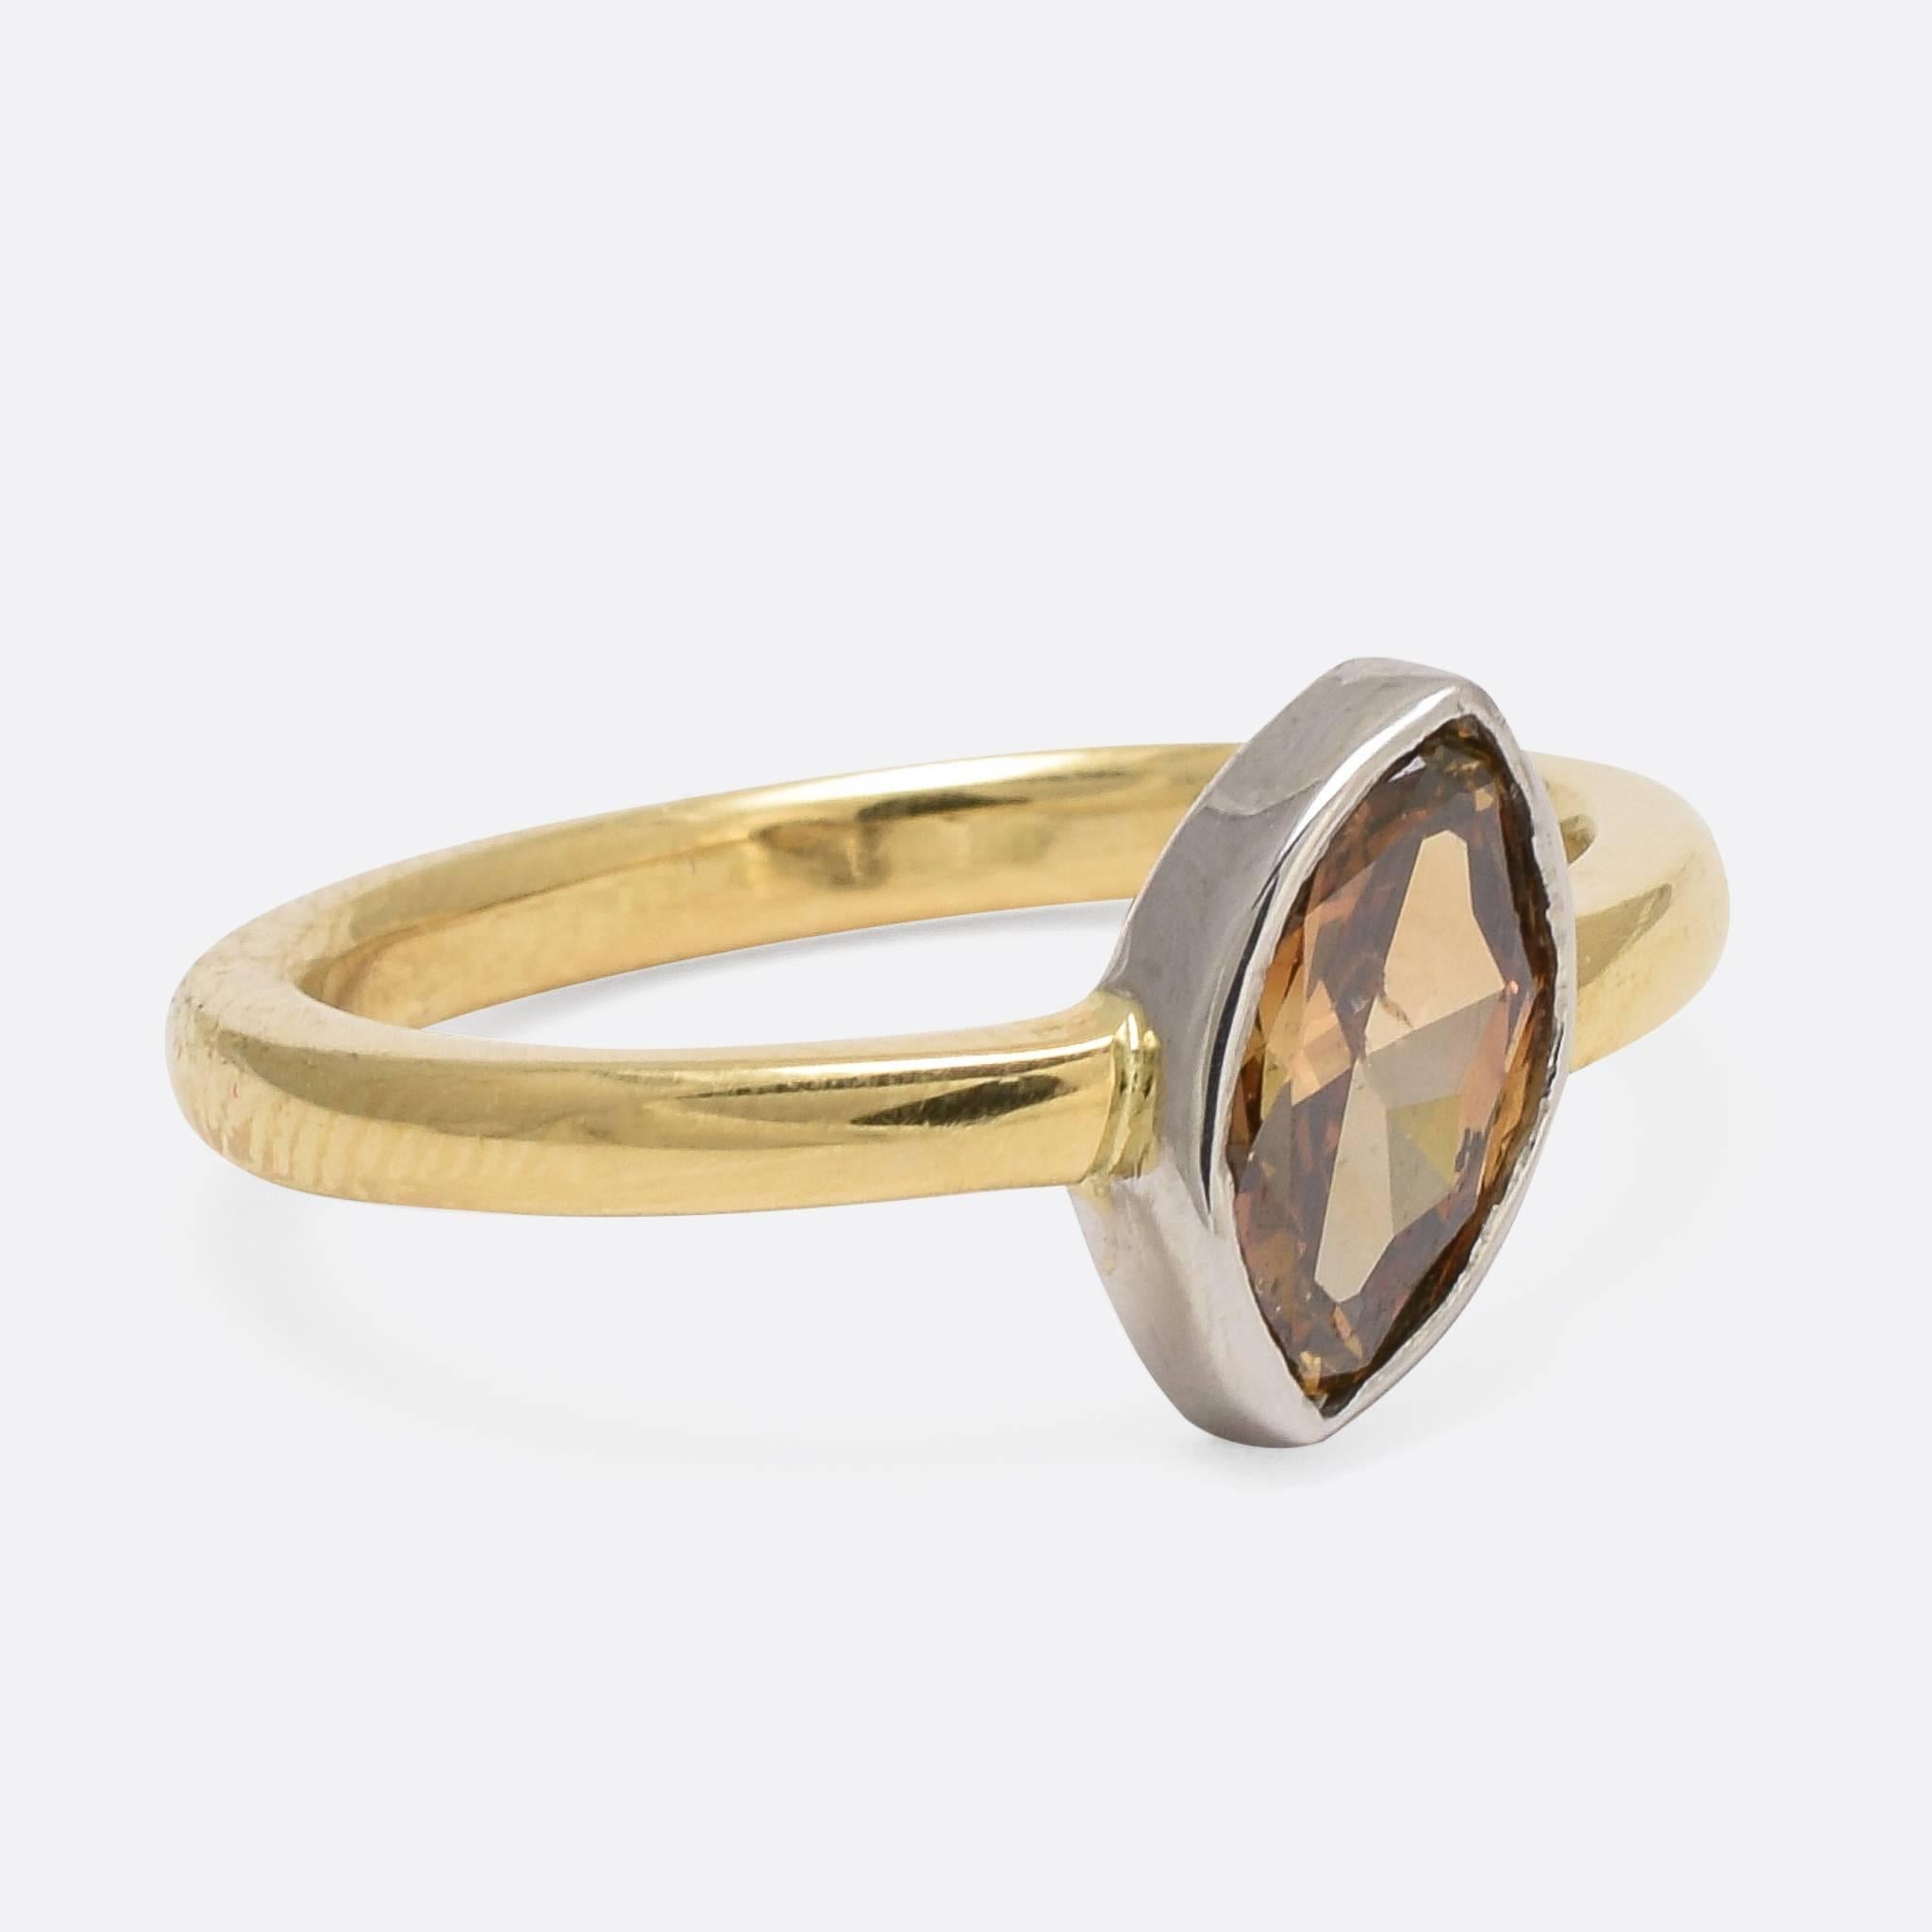 We have set this unusual vintage diamond in a contemporary ring mount of our own design. The moval cut stone weighs .81ct, and is a gorgeous cognac brown colour. The simple collet setting accentuates the unusual shape of the stone, which is itself